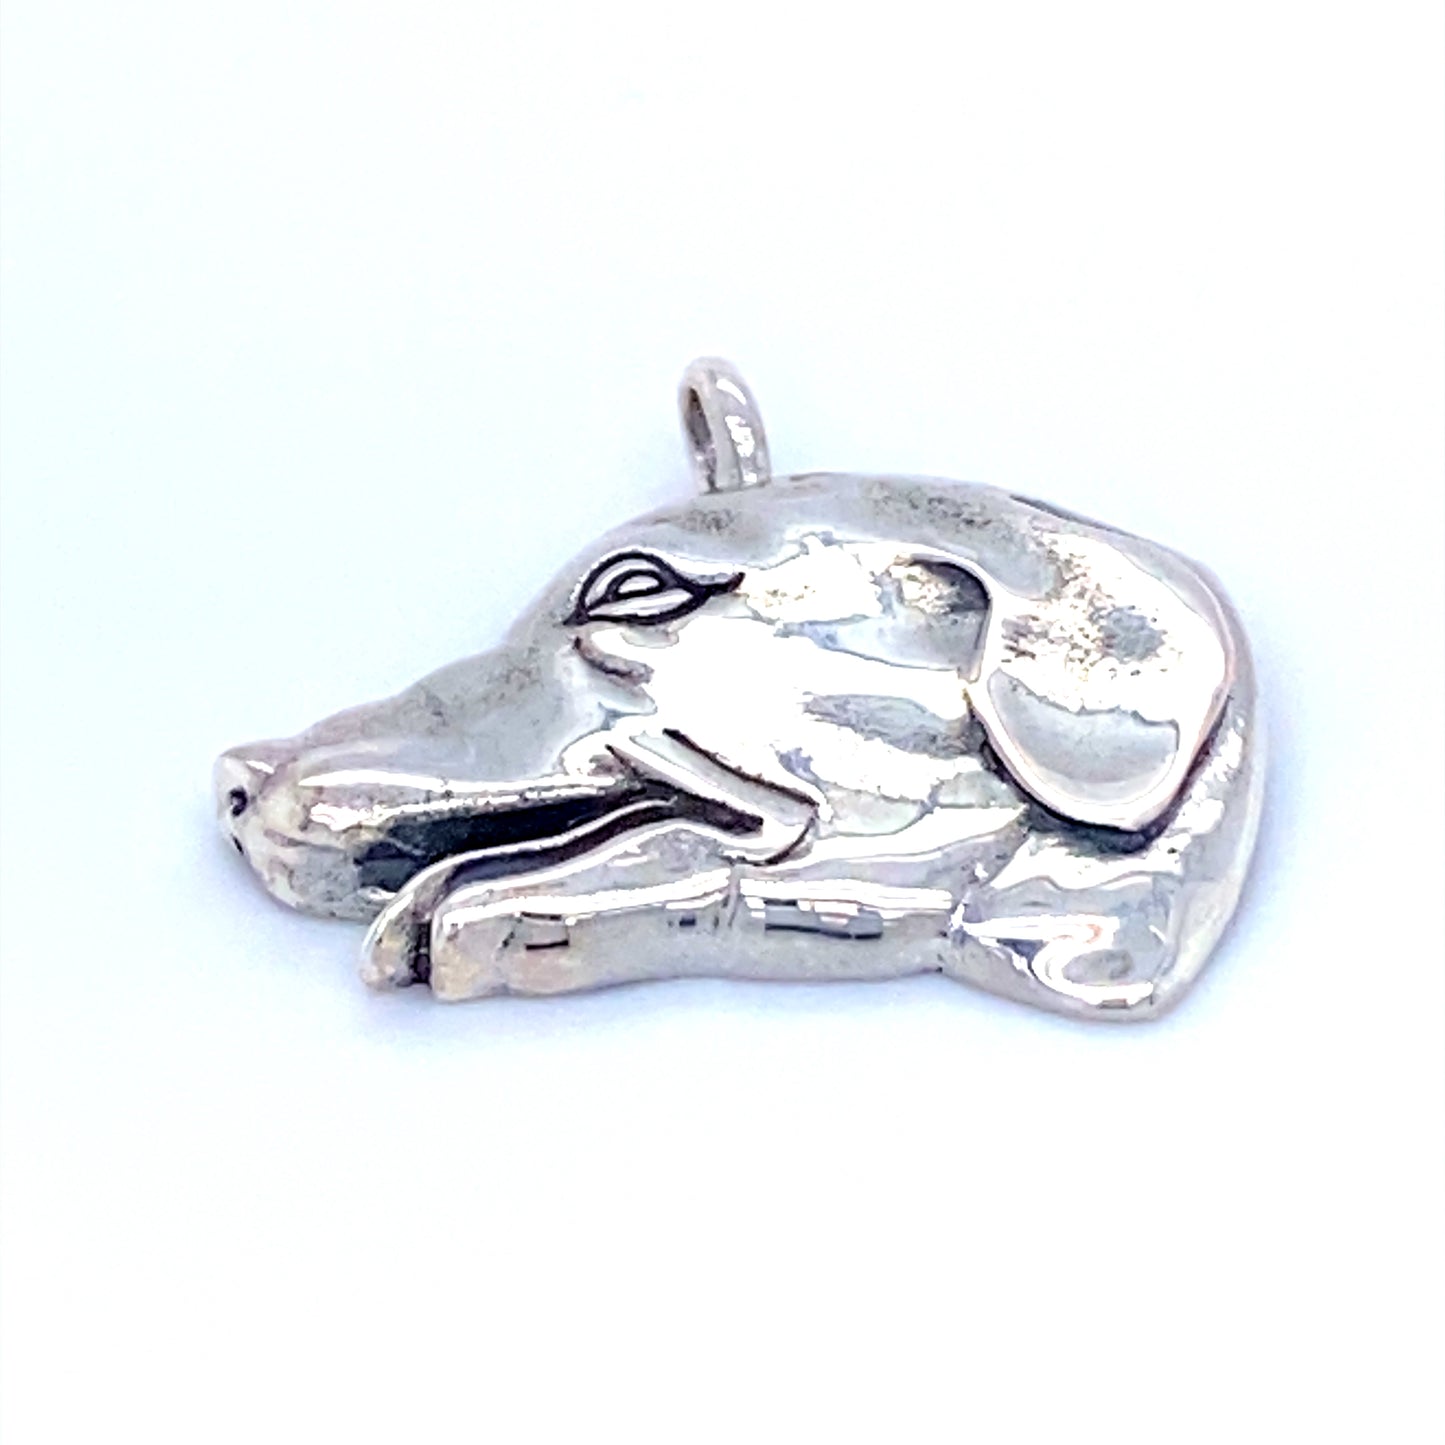 A Super Silver Dog Head Pendant on a white background.